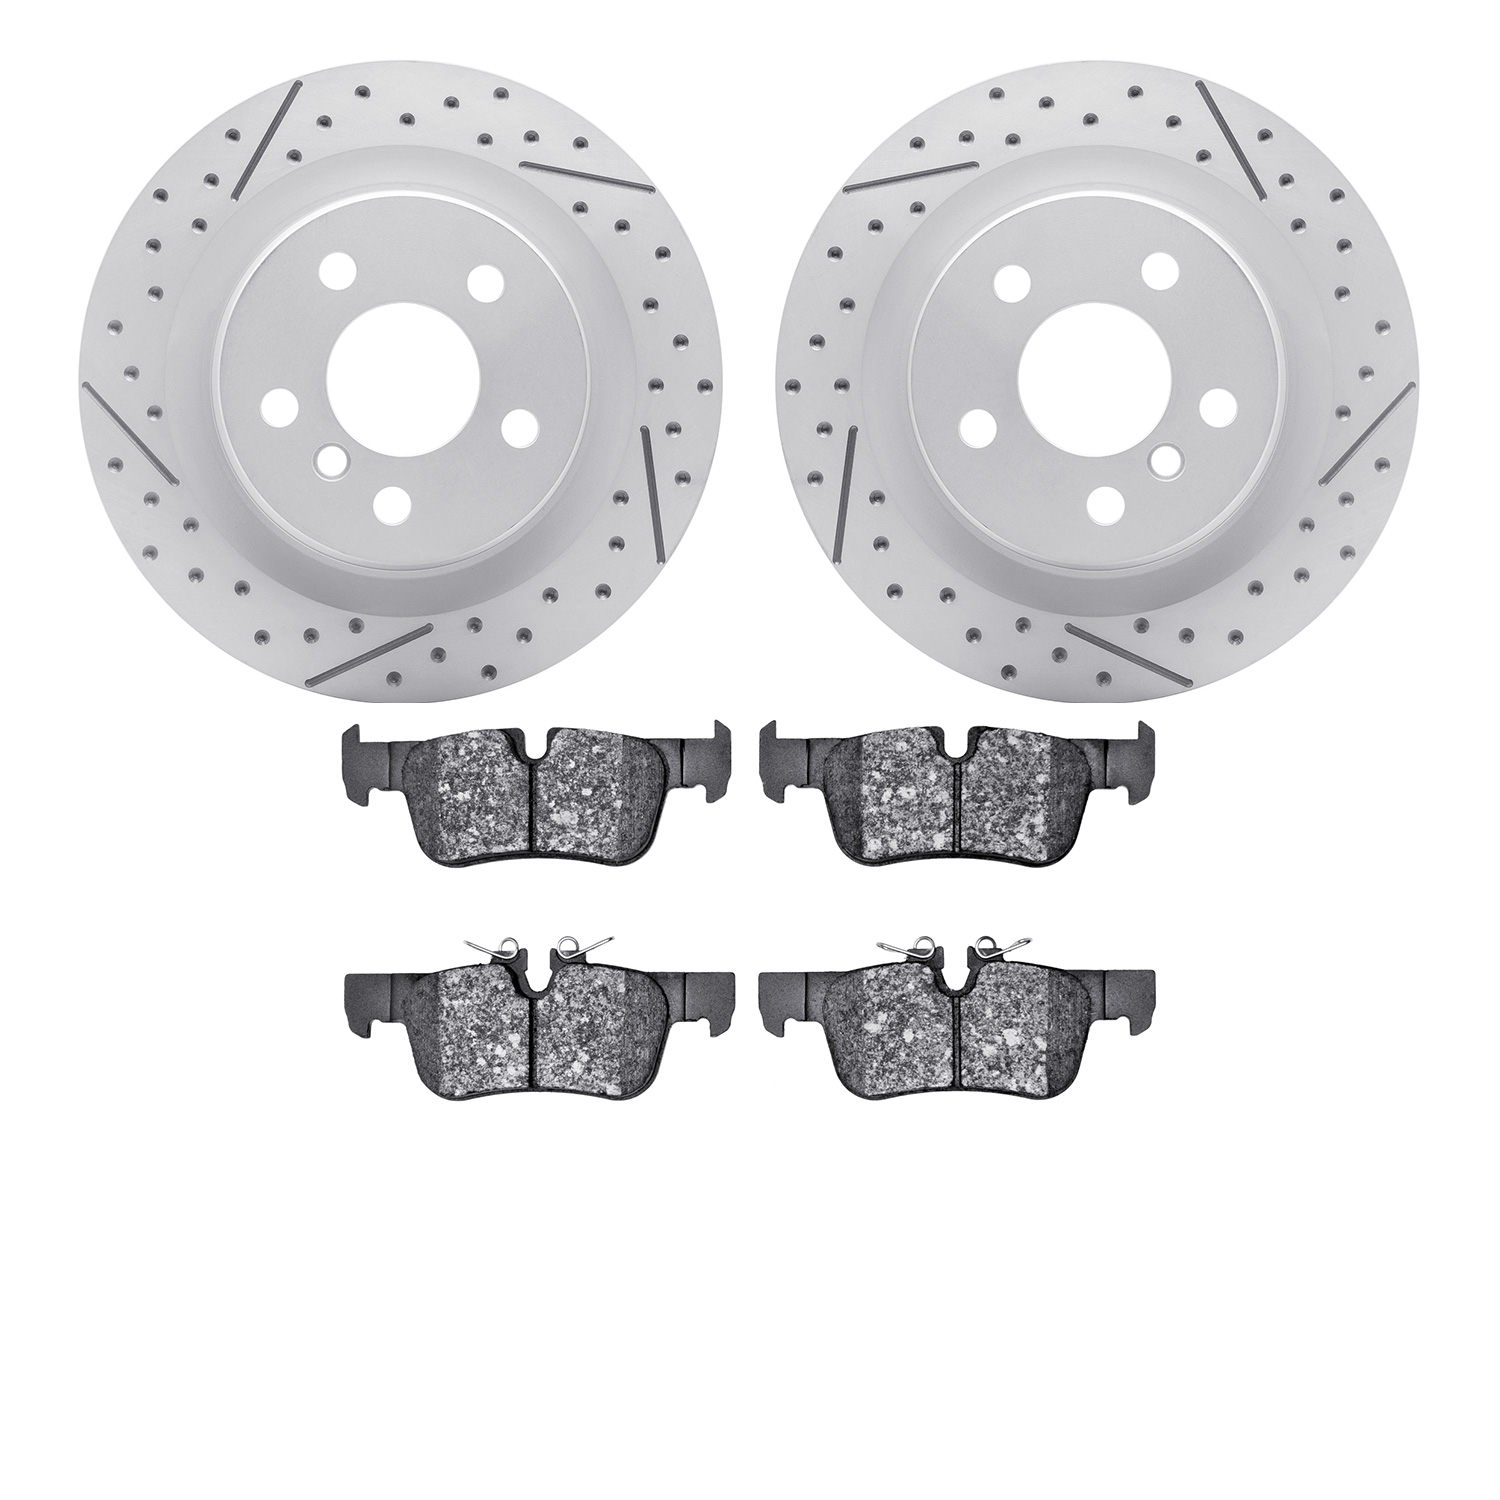 2502-31135 Geoperformance Drilled/Slotted Rotors w/5000 Advanced Brake Pads Kit, 2018-2018 BMW, Position: Rear